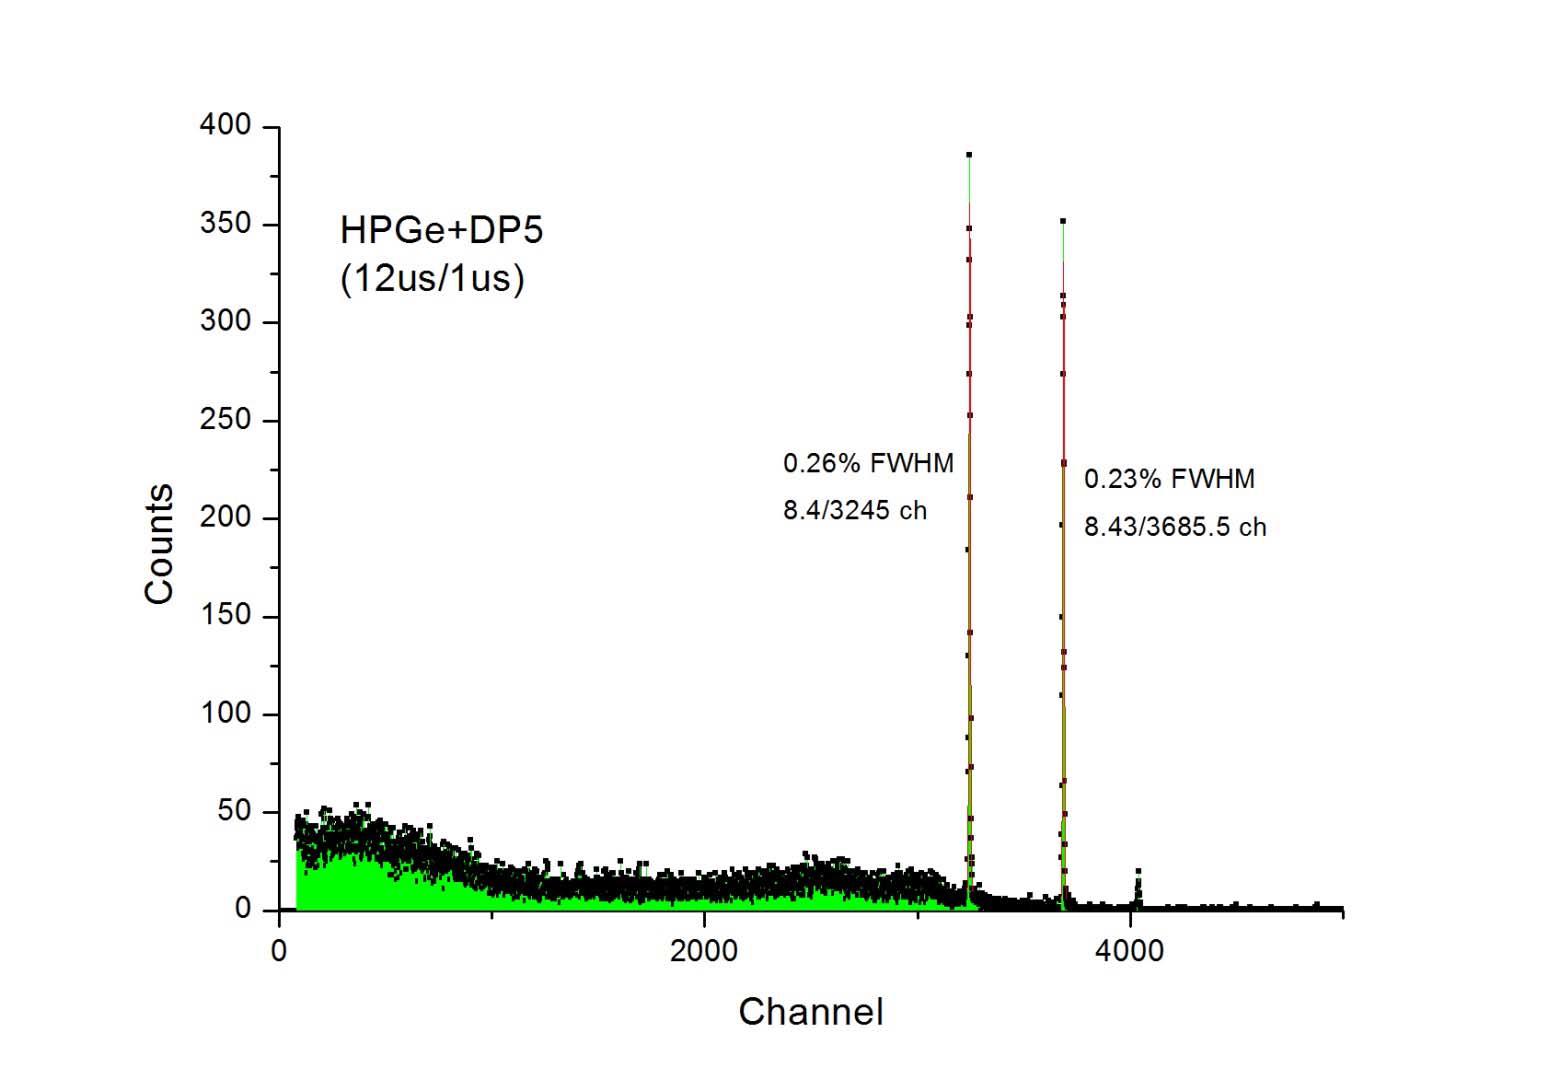 Spectrum of 60Co using both HPGe and DP5.